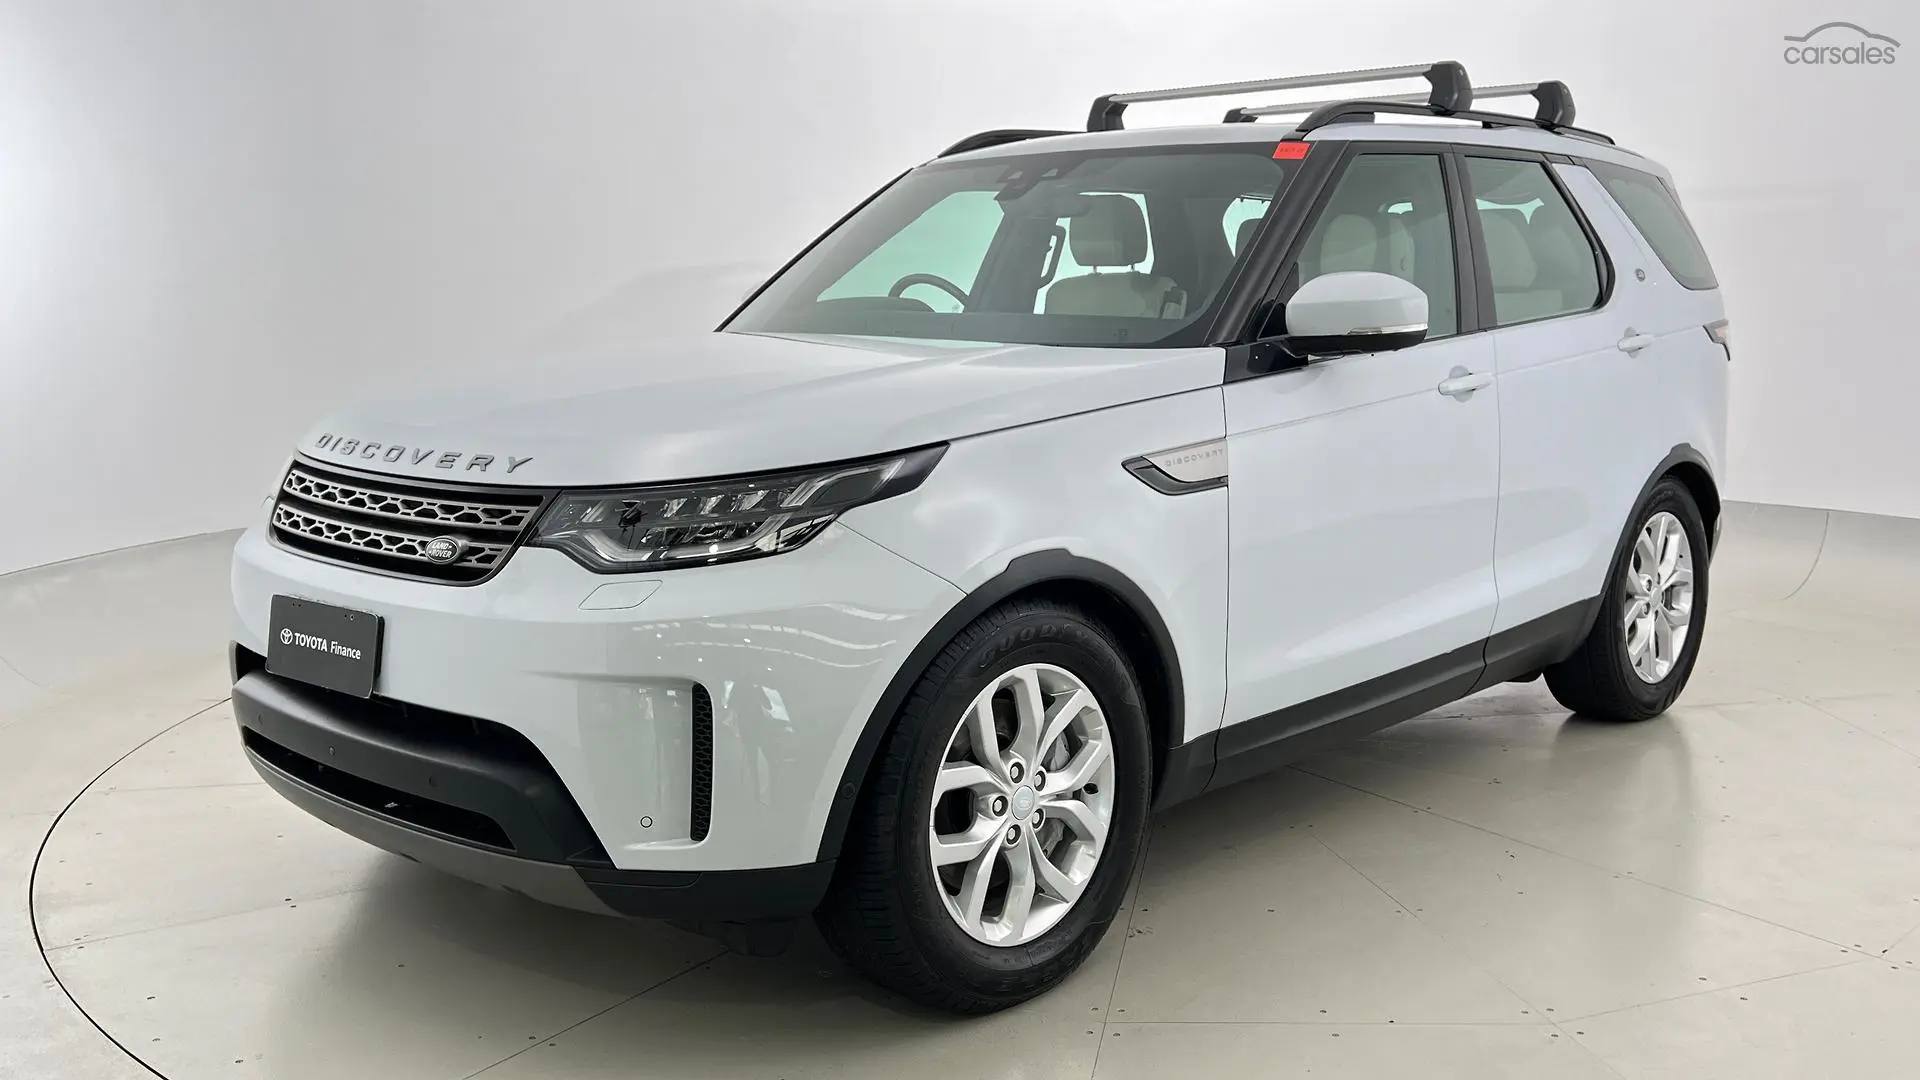 2019 Land Rover Discovery Image 1